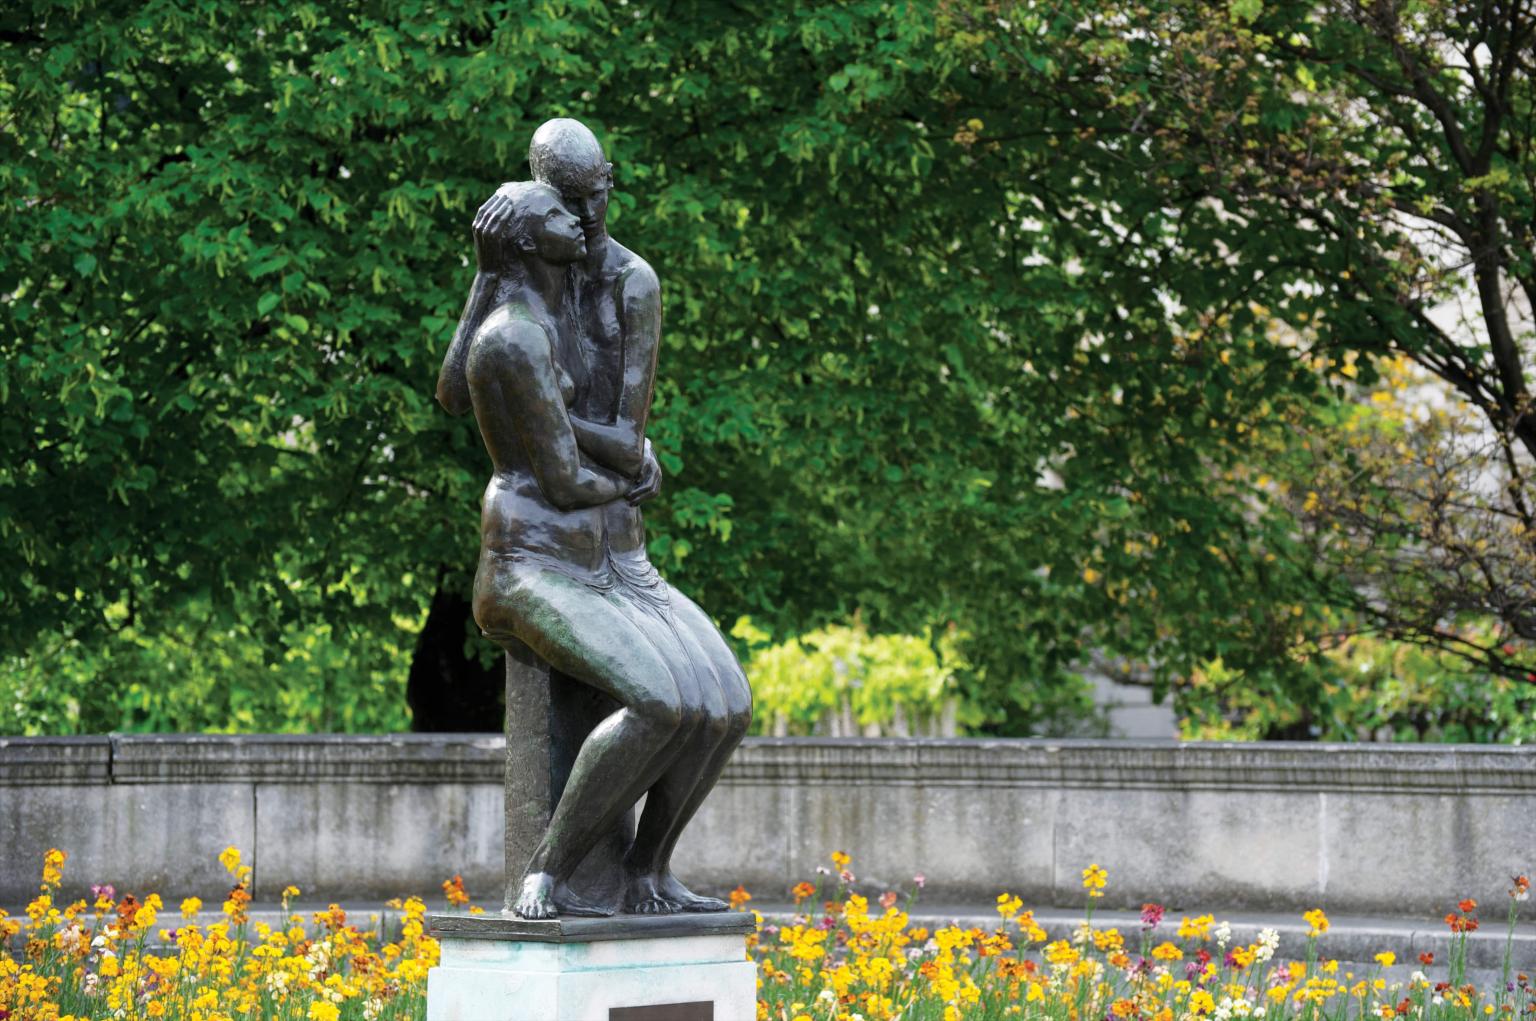 Bronze sculpture of young couple, seated side-by-side and cheek-to-cheek in a garden. The ground is covered by leaves and there are many trees in the background beyond a low wall.